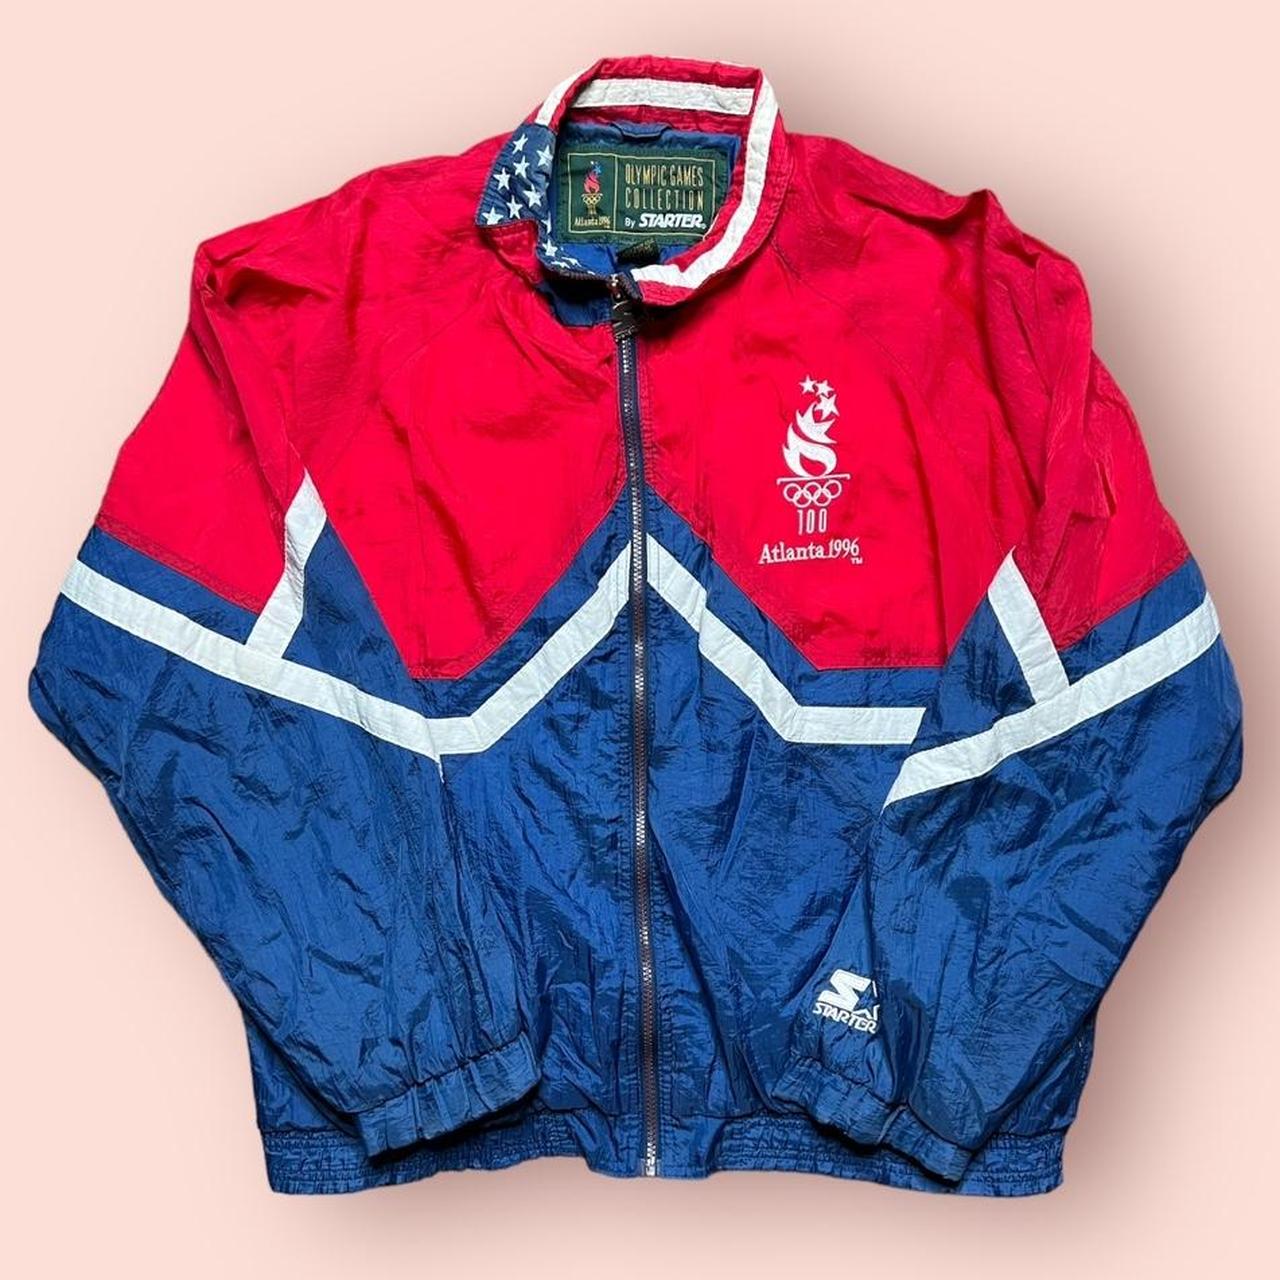 What Was Your Favorite Starter Jacket In The 90s?